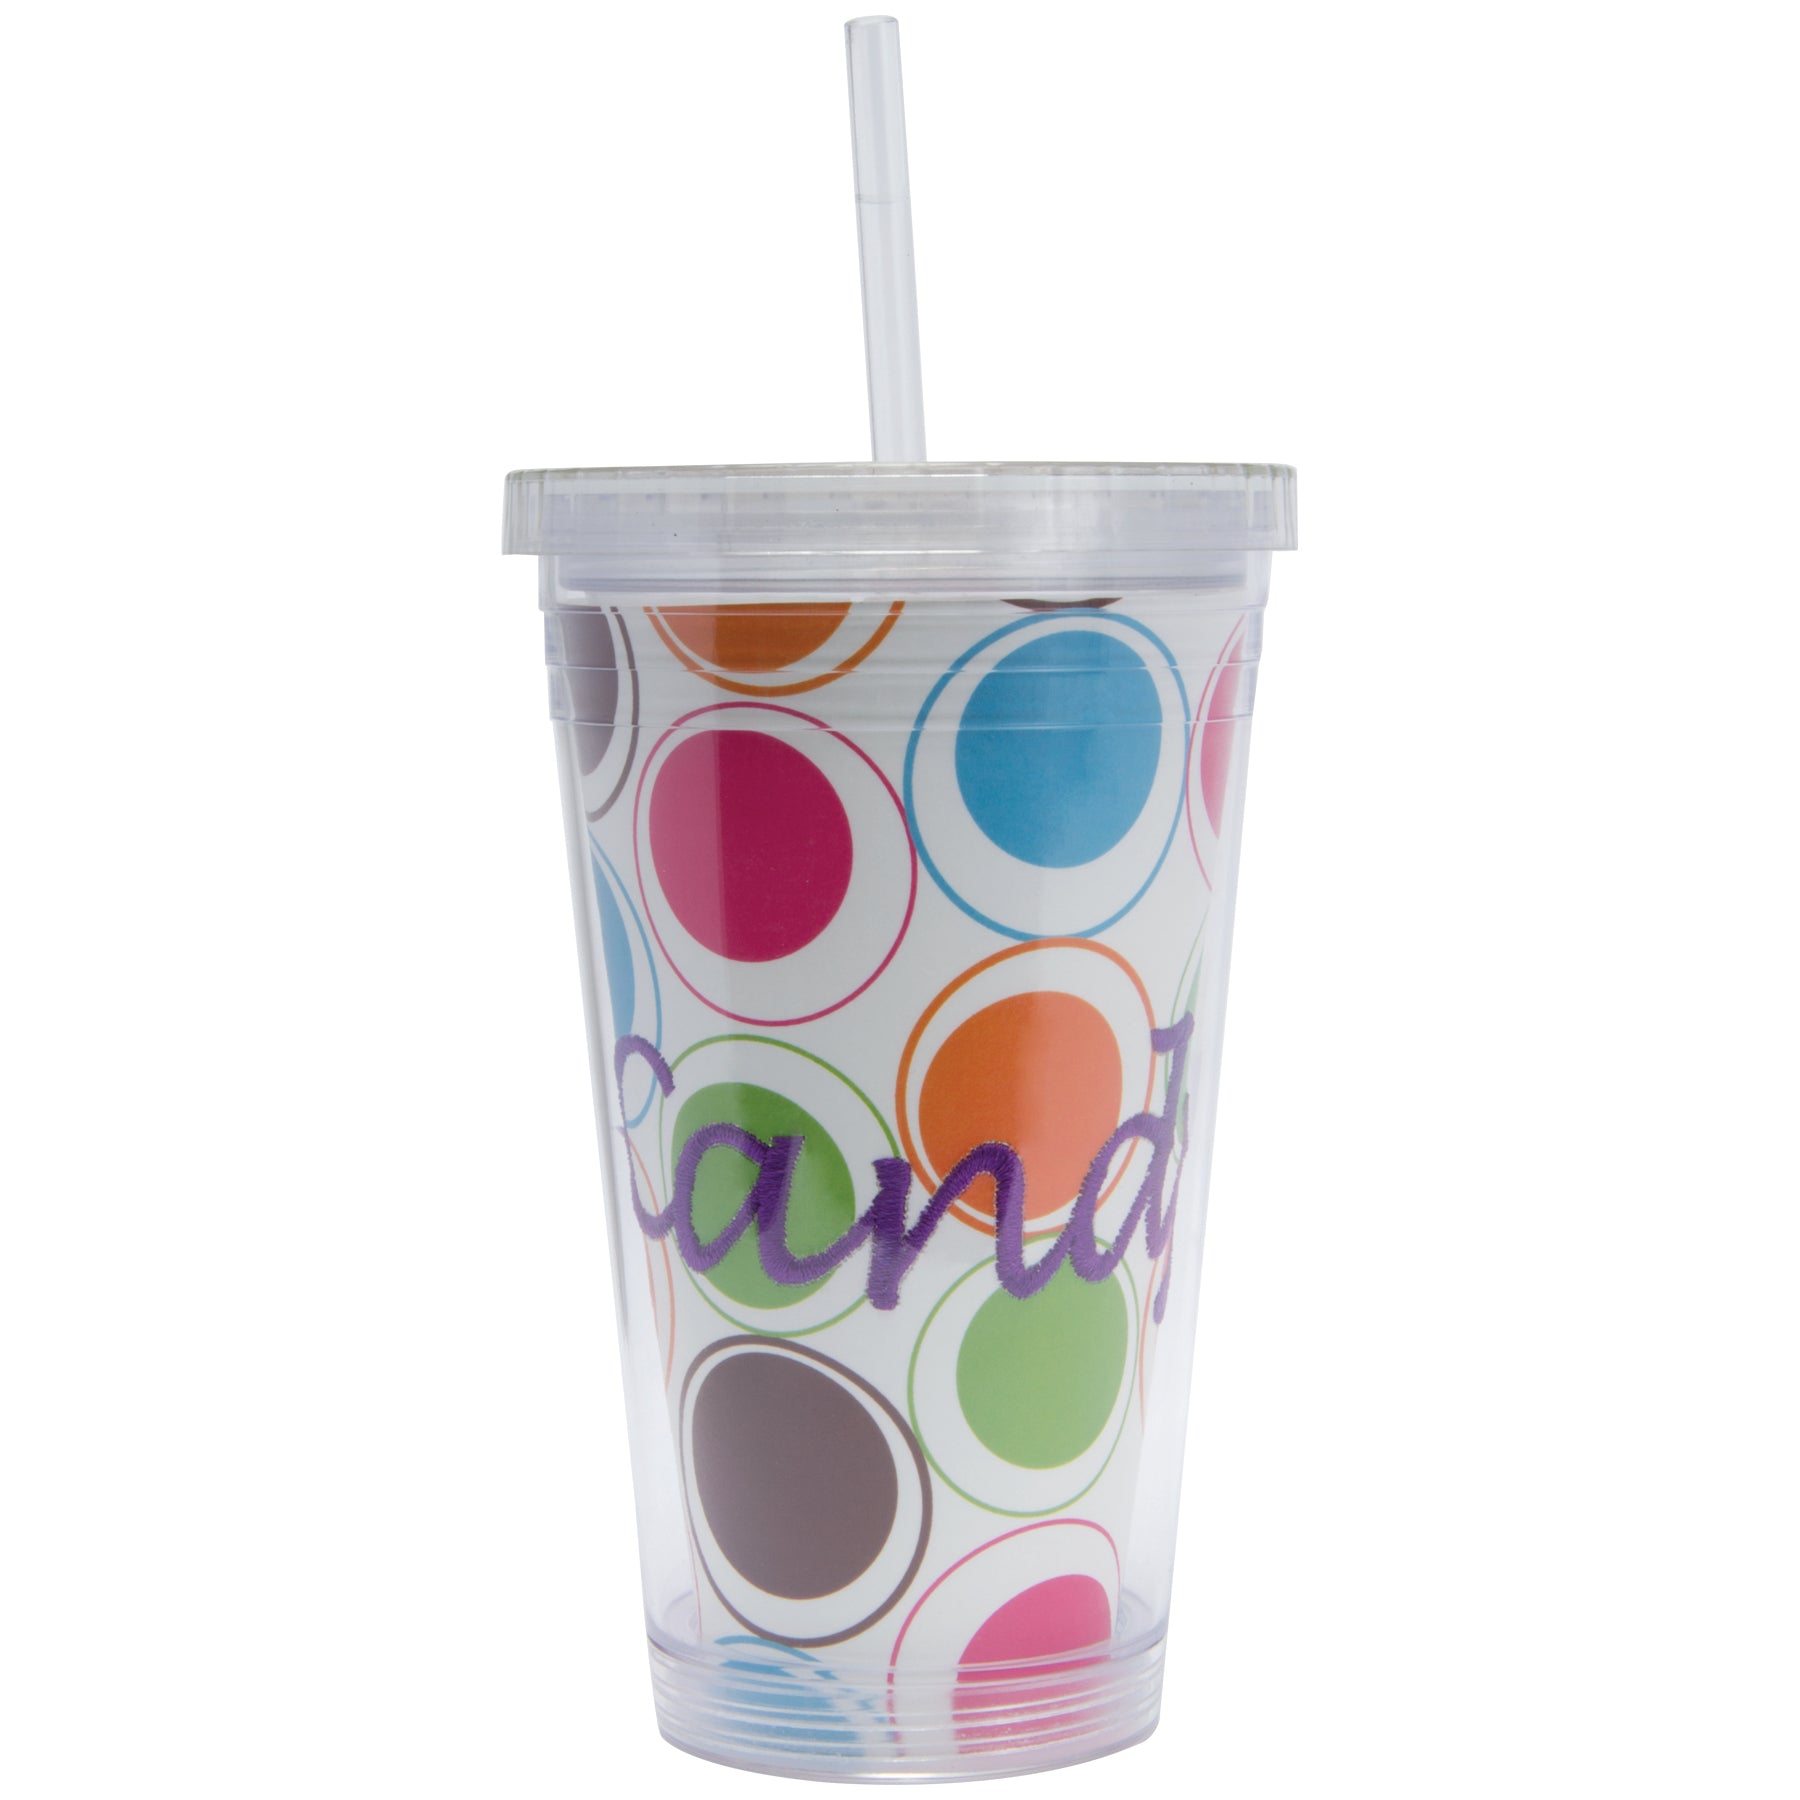 Qraft Drinkware Double Wall Insulated Acrylic Tumblers with Straw, Clear - 12 pack